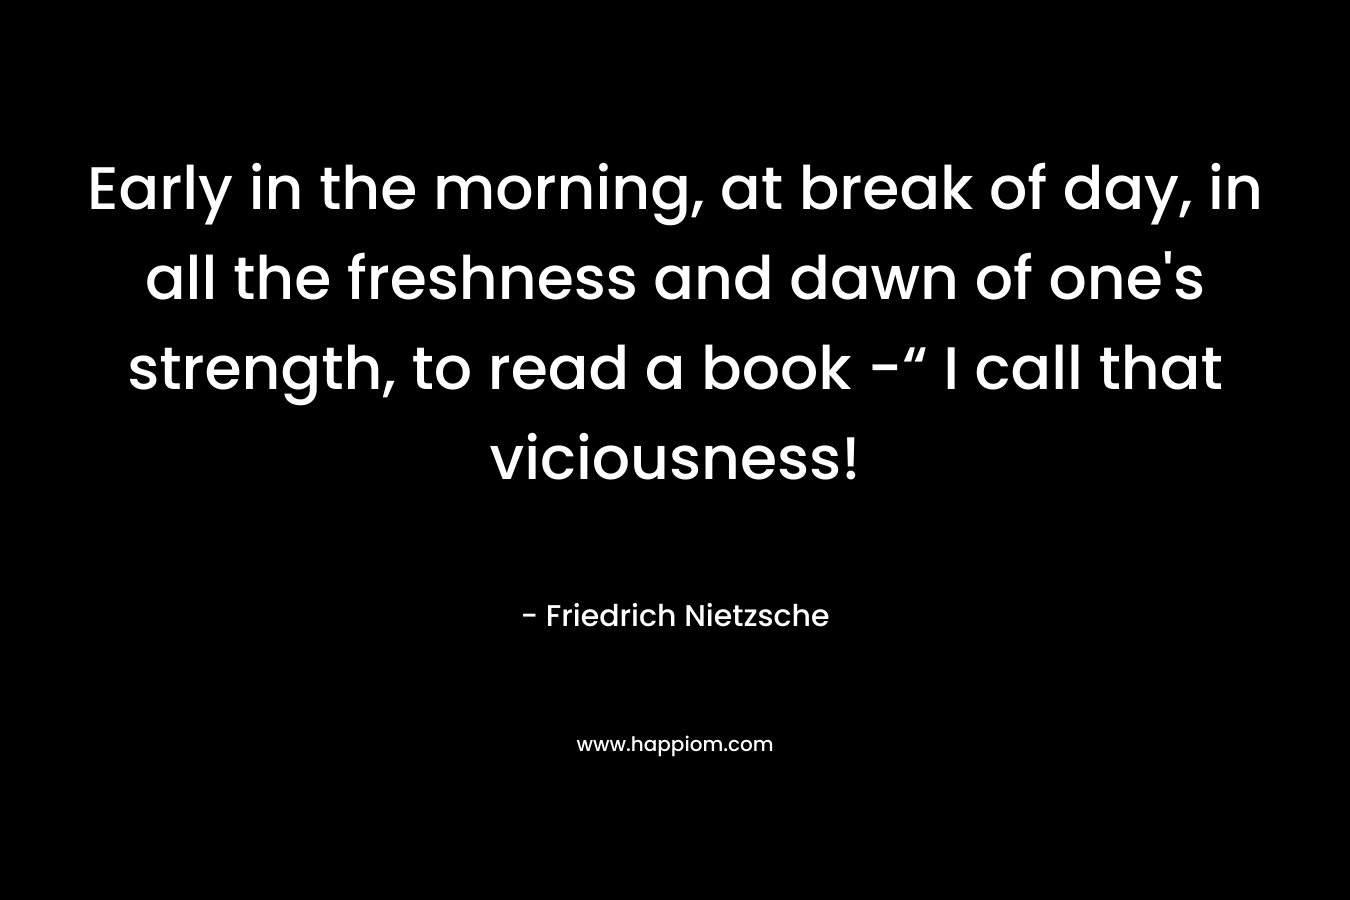 Early in the morning, at break of day, in all the freshness and dawn of one's strength, to read a book -“ I call that viciousness!